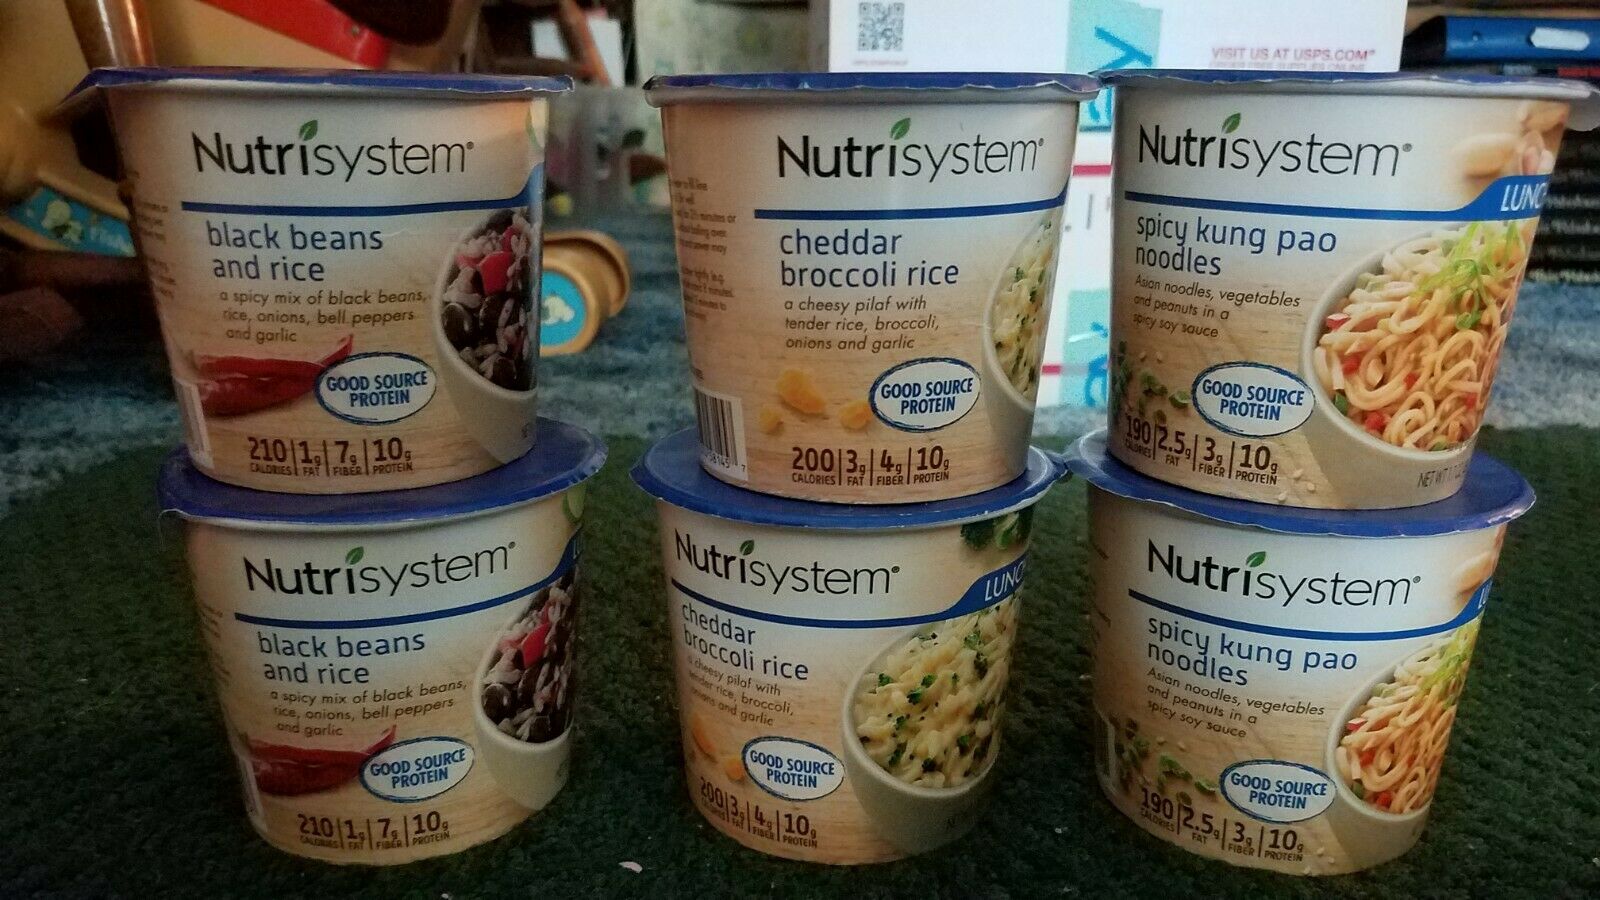 Can you choose Nutrisystem as the only weight loss program?